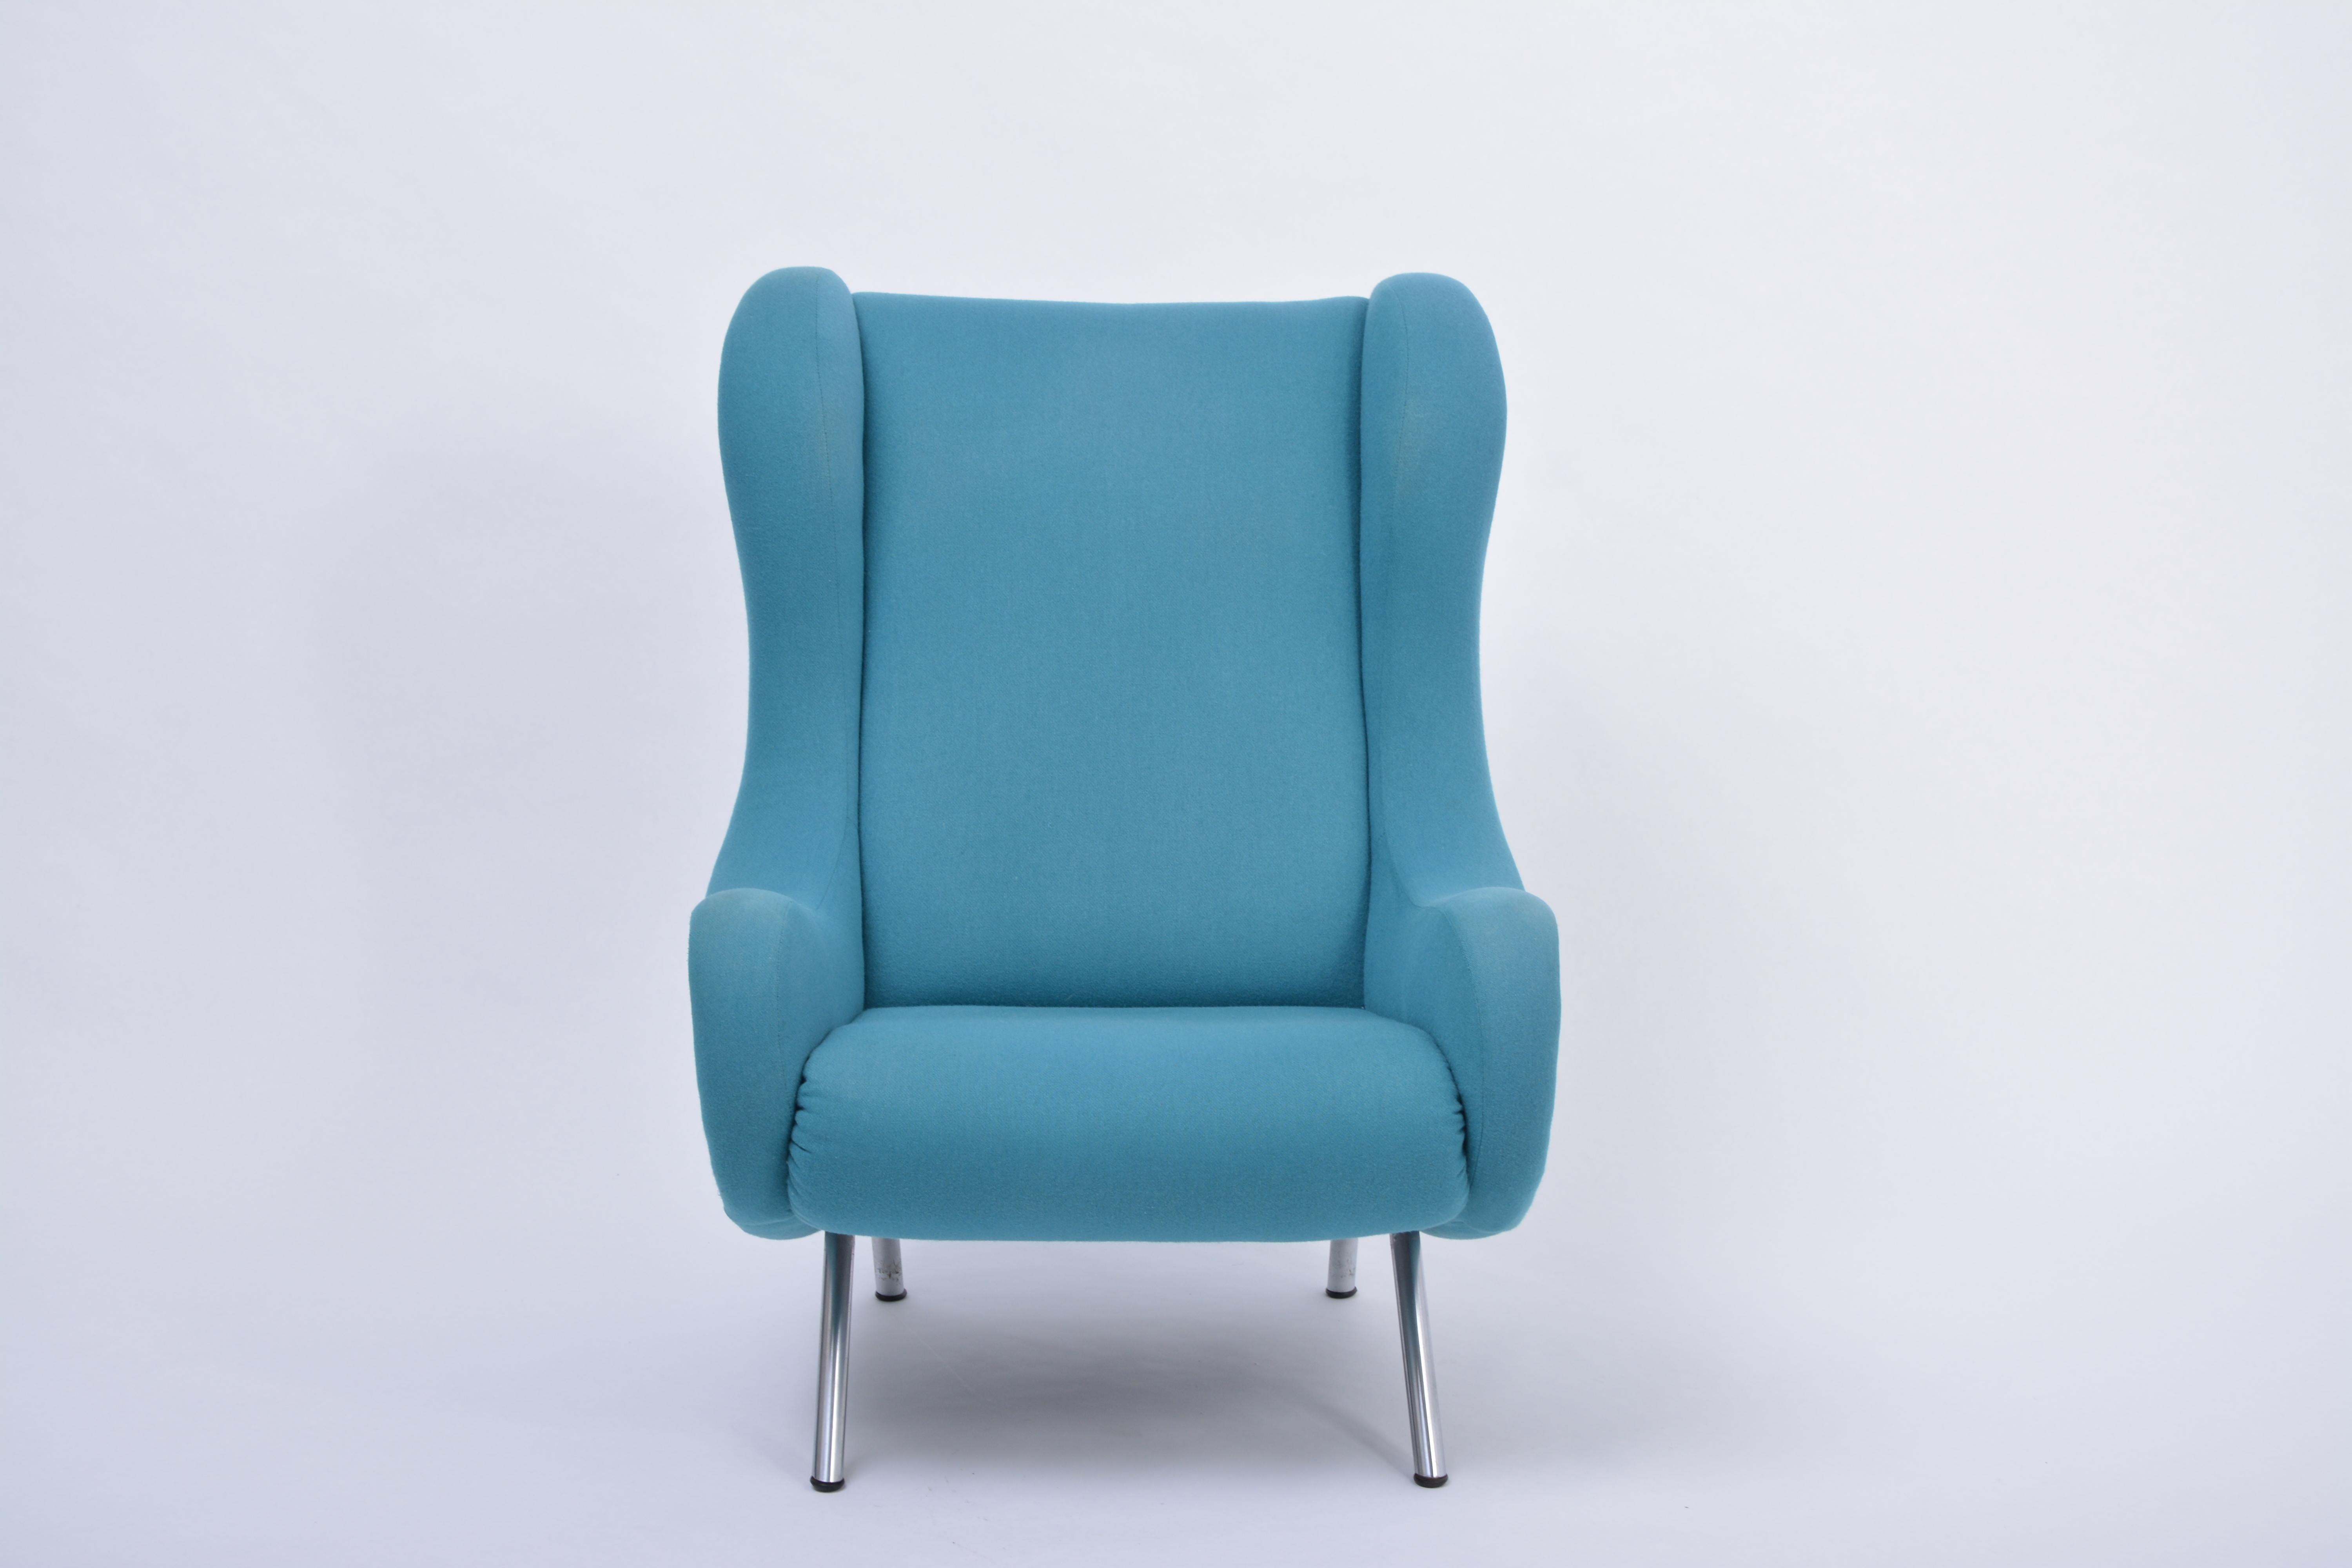 Reupholstered blue Mid-Century Modern Marco Zanuso senior lounge chair
Marco Zanuso designed his iconic 